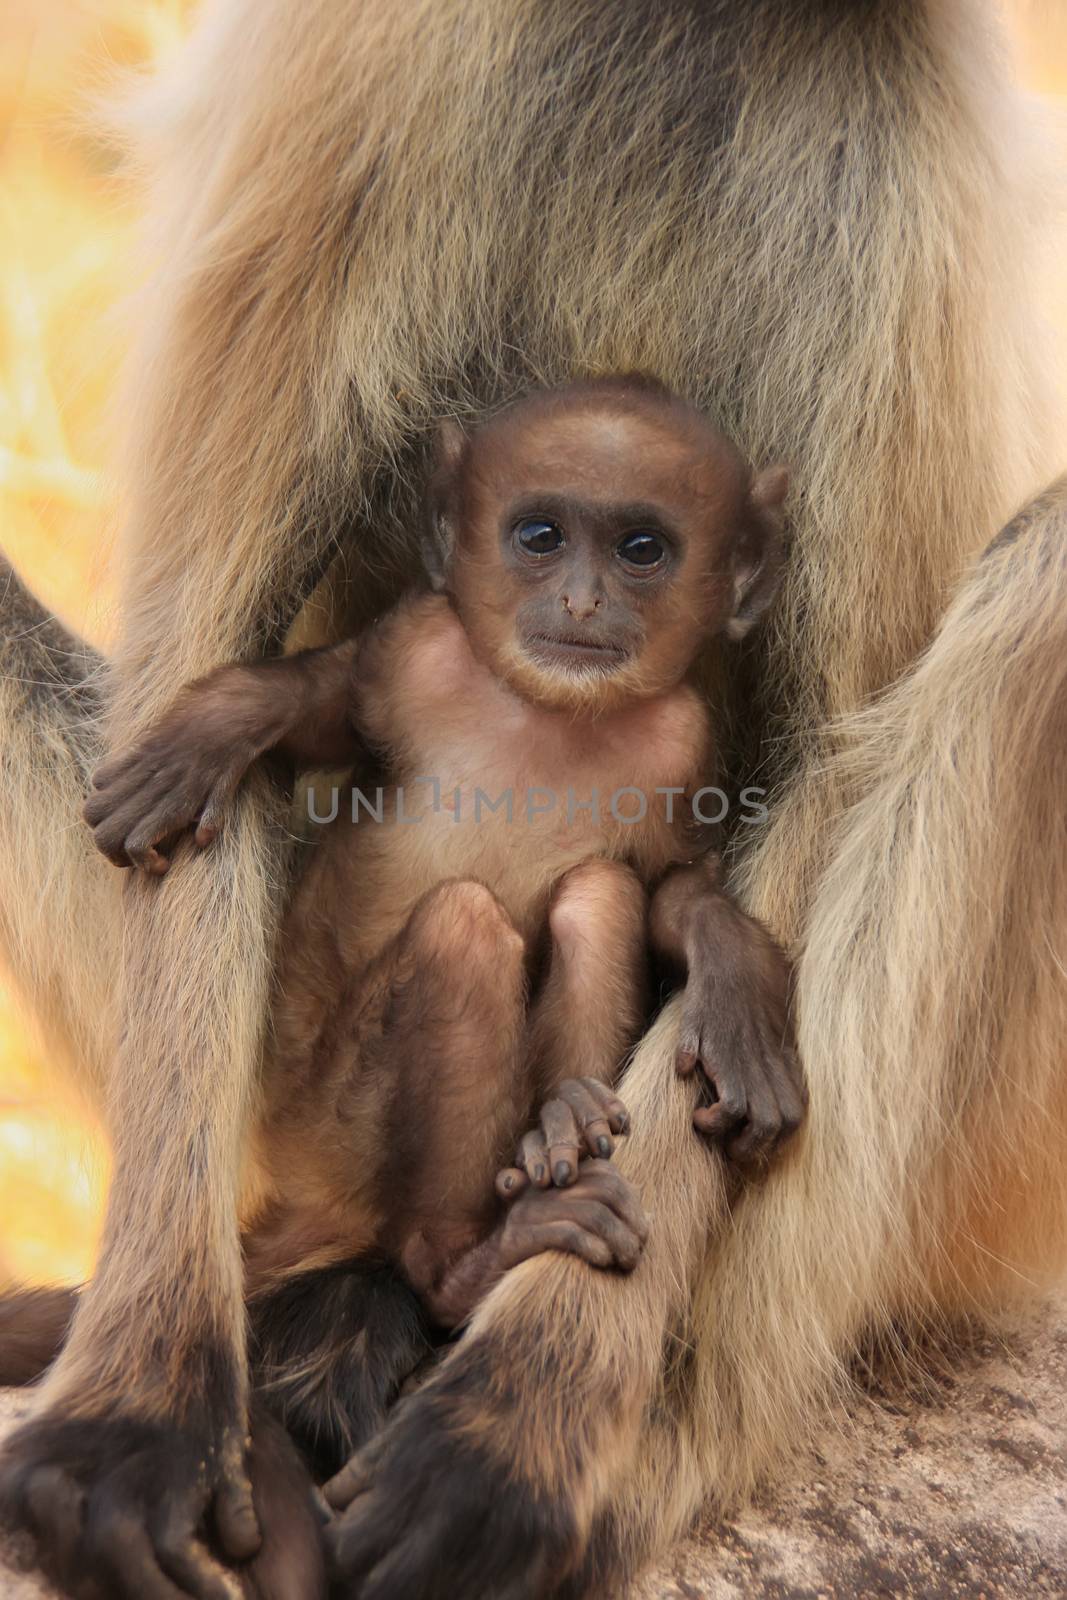 Baby Gray langur (Semnopithecus dussumieri) resting in mothers arms, Ranthambore Fort, Rajasthan, India